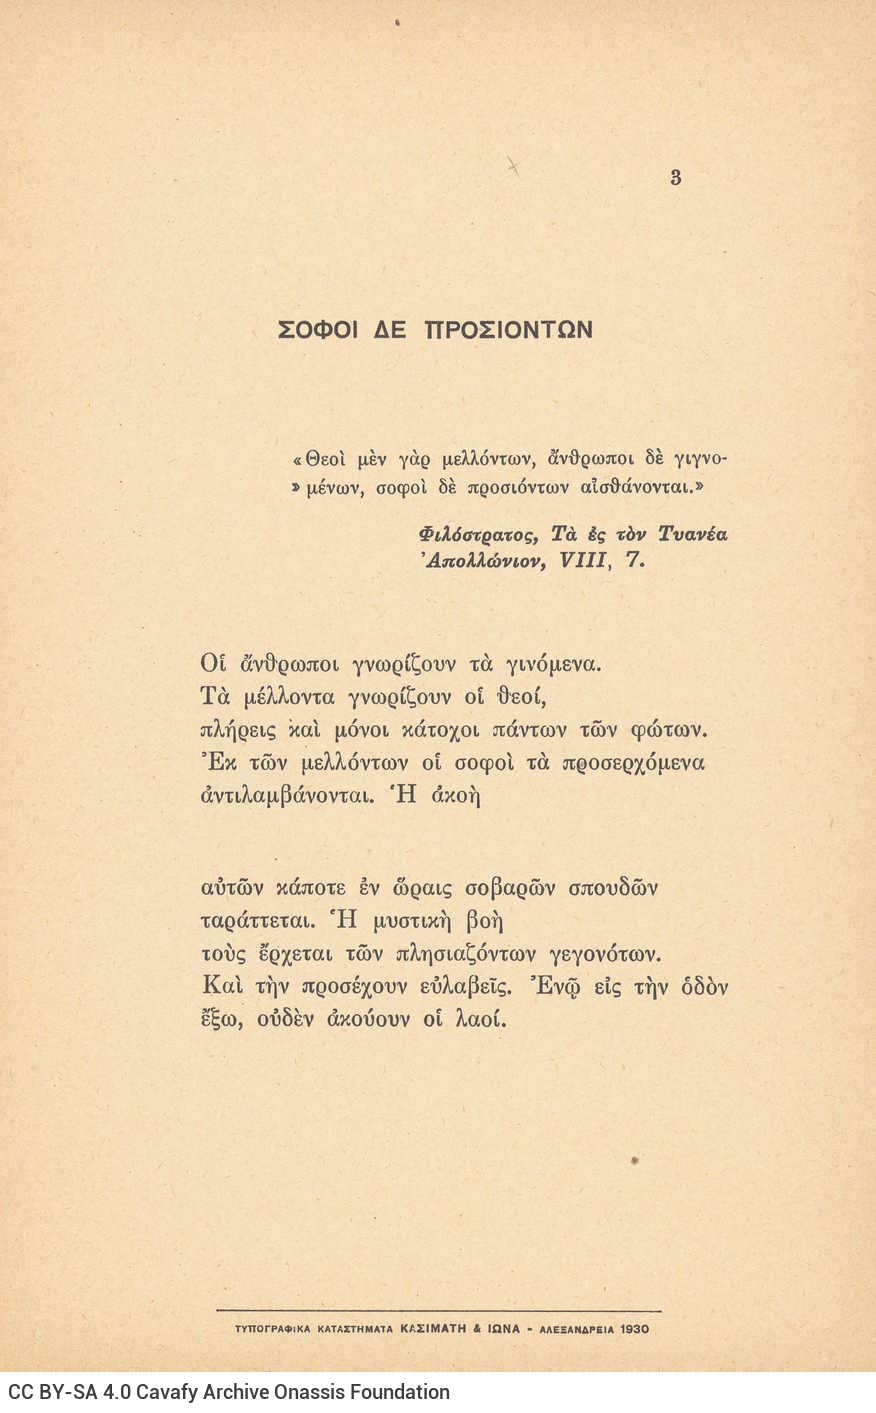 Poetry collection by Cavafy (Γ10). The title "C. P. Cavafy's Poems (1905-1915)" on the cover and title page. Also on the tit